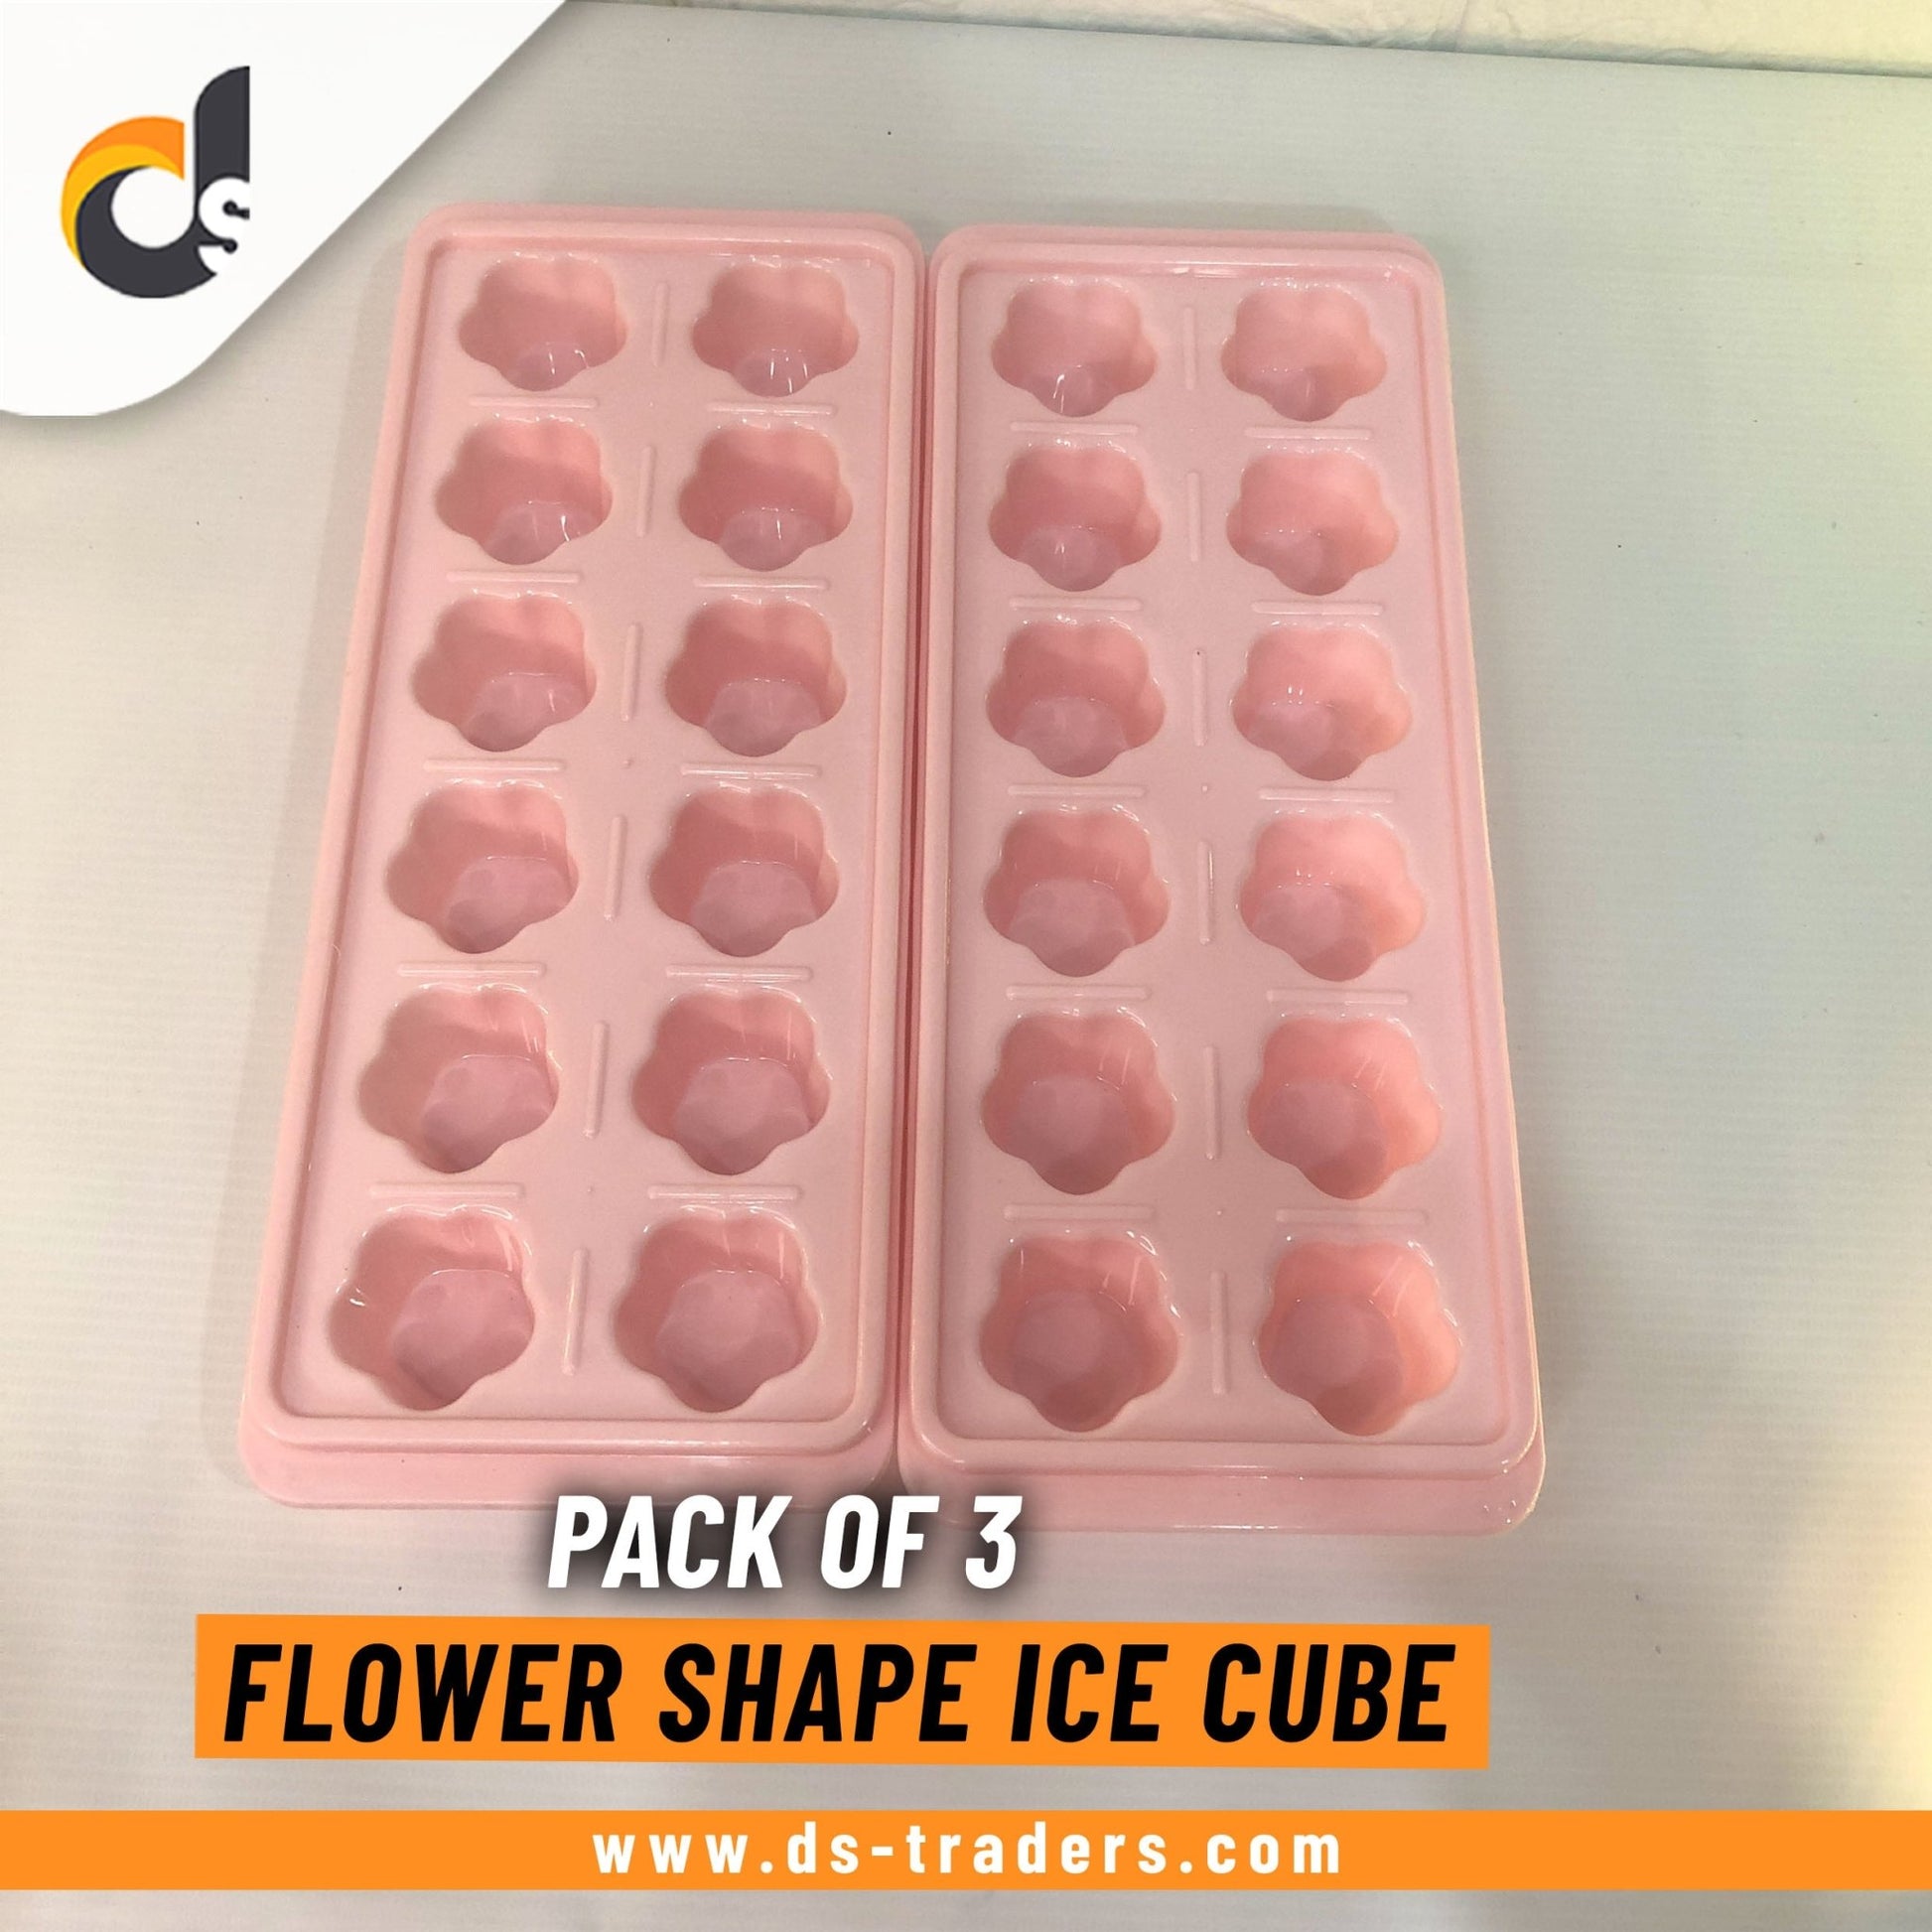 Pack Of 3 - Flower Shape Ice Cube - DS Traders